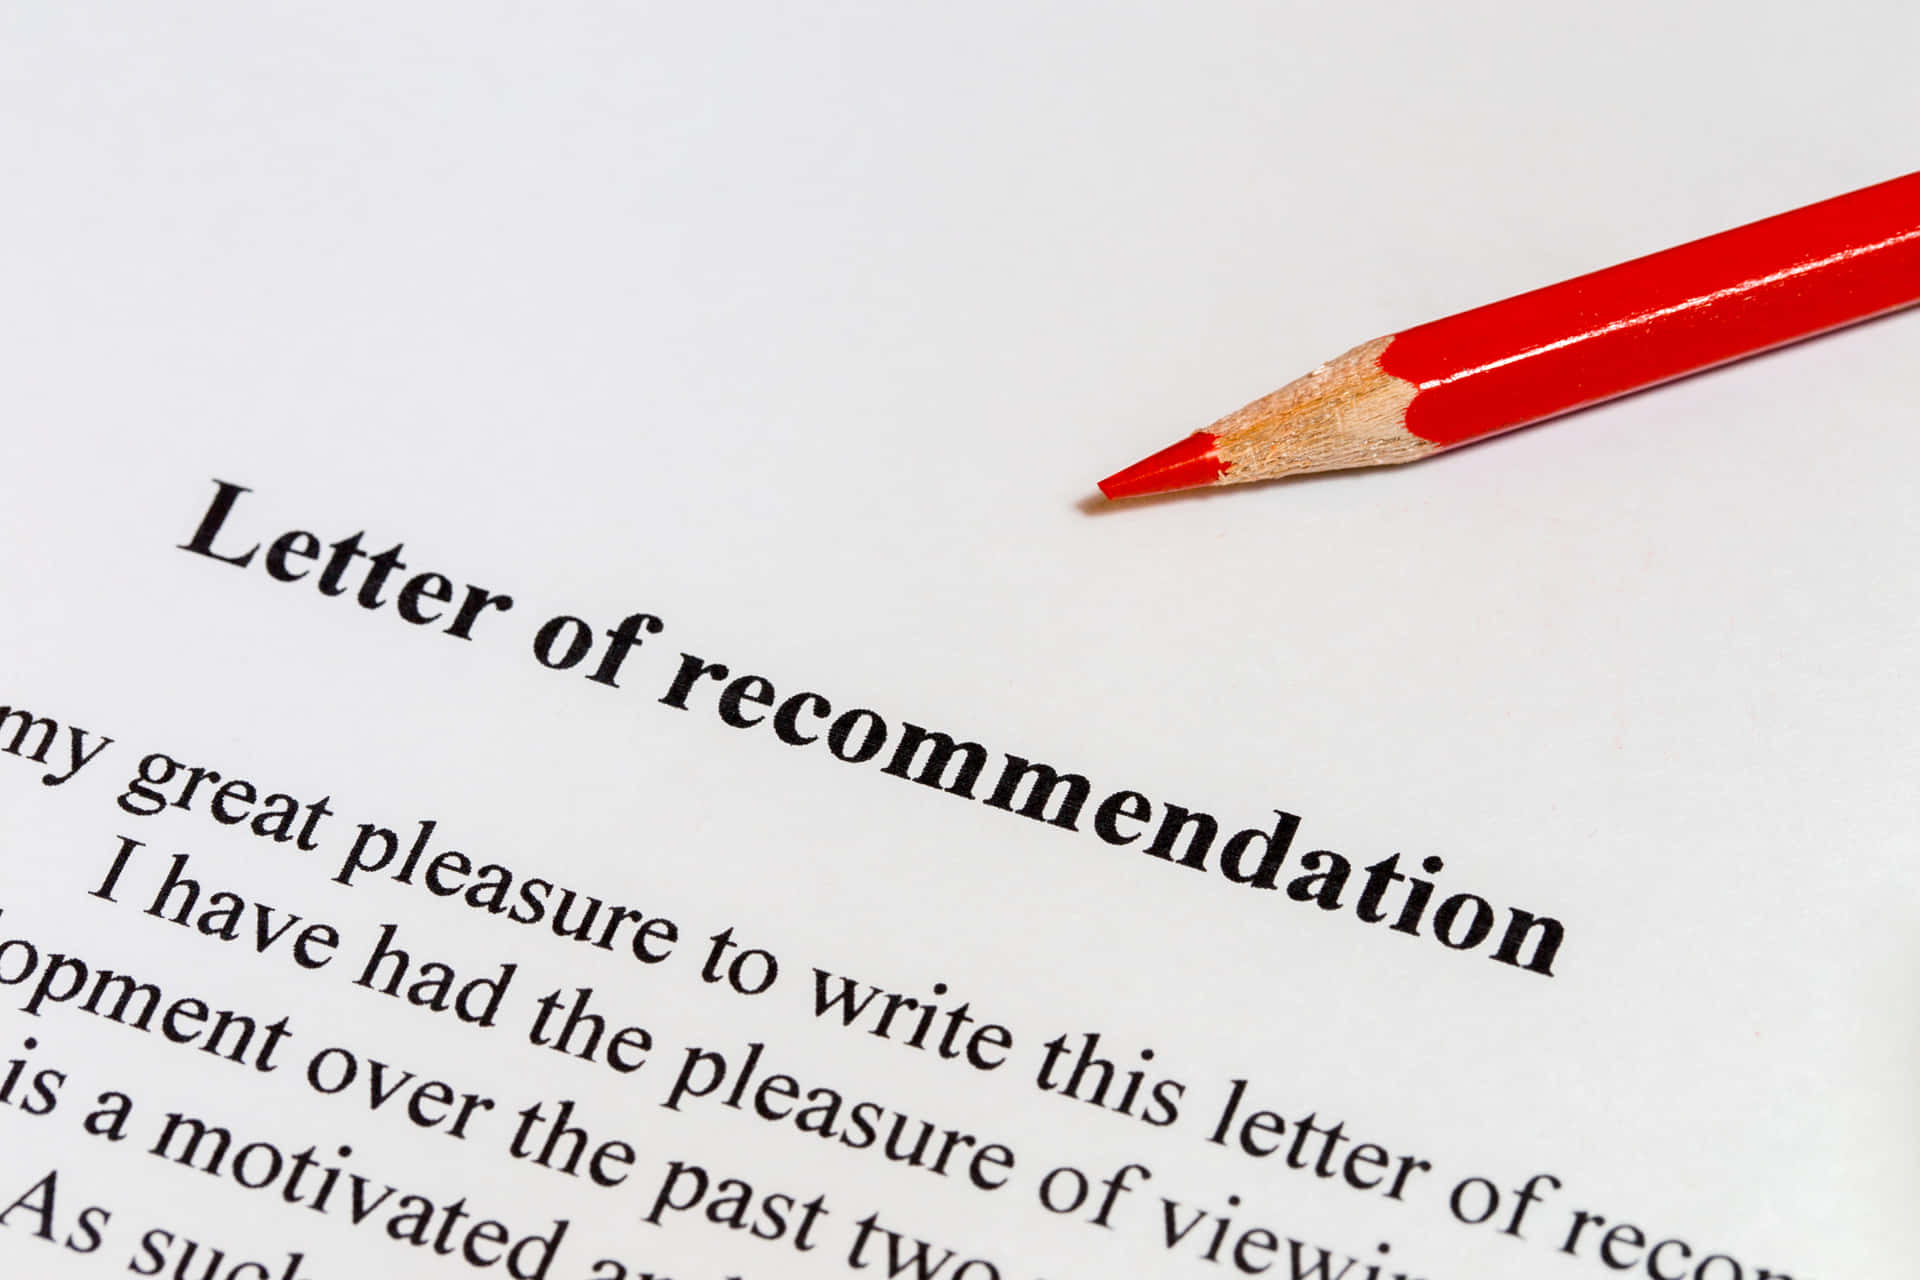 A Letter Of Recommendation With A Red Pencil